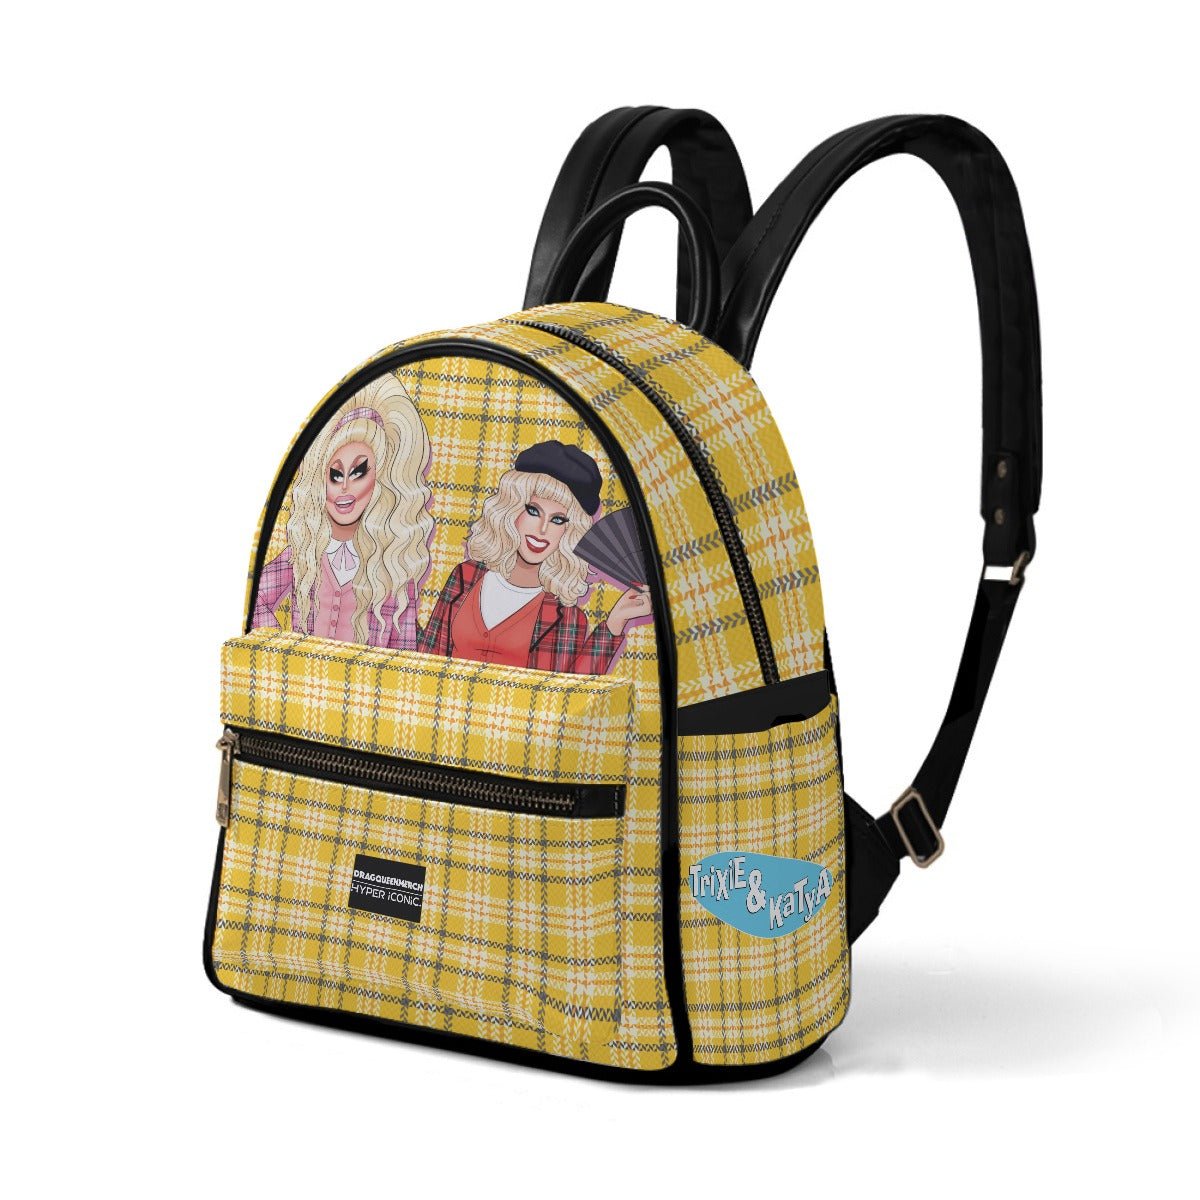 DQM X HYPER iCONiC. Trixie and Katya Clueless Mini Backpack - dragqueenmerch